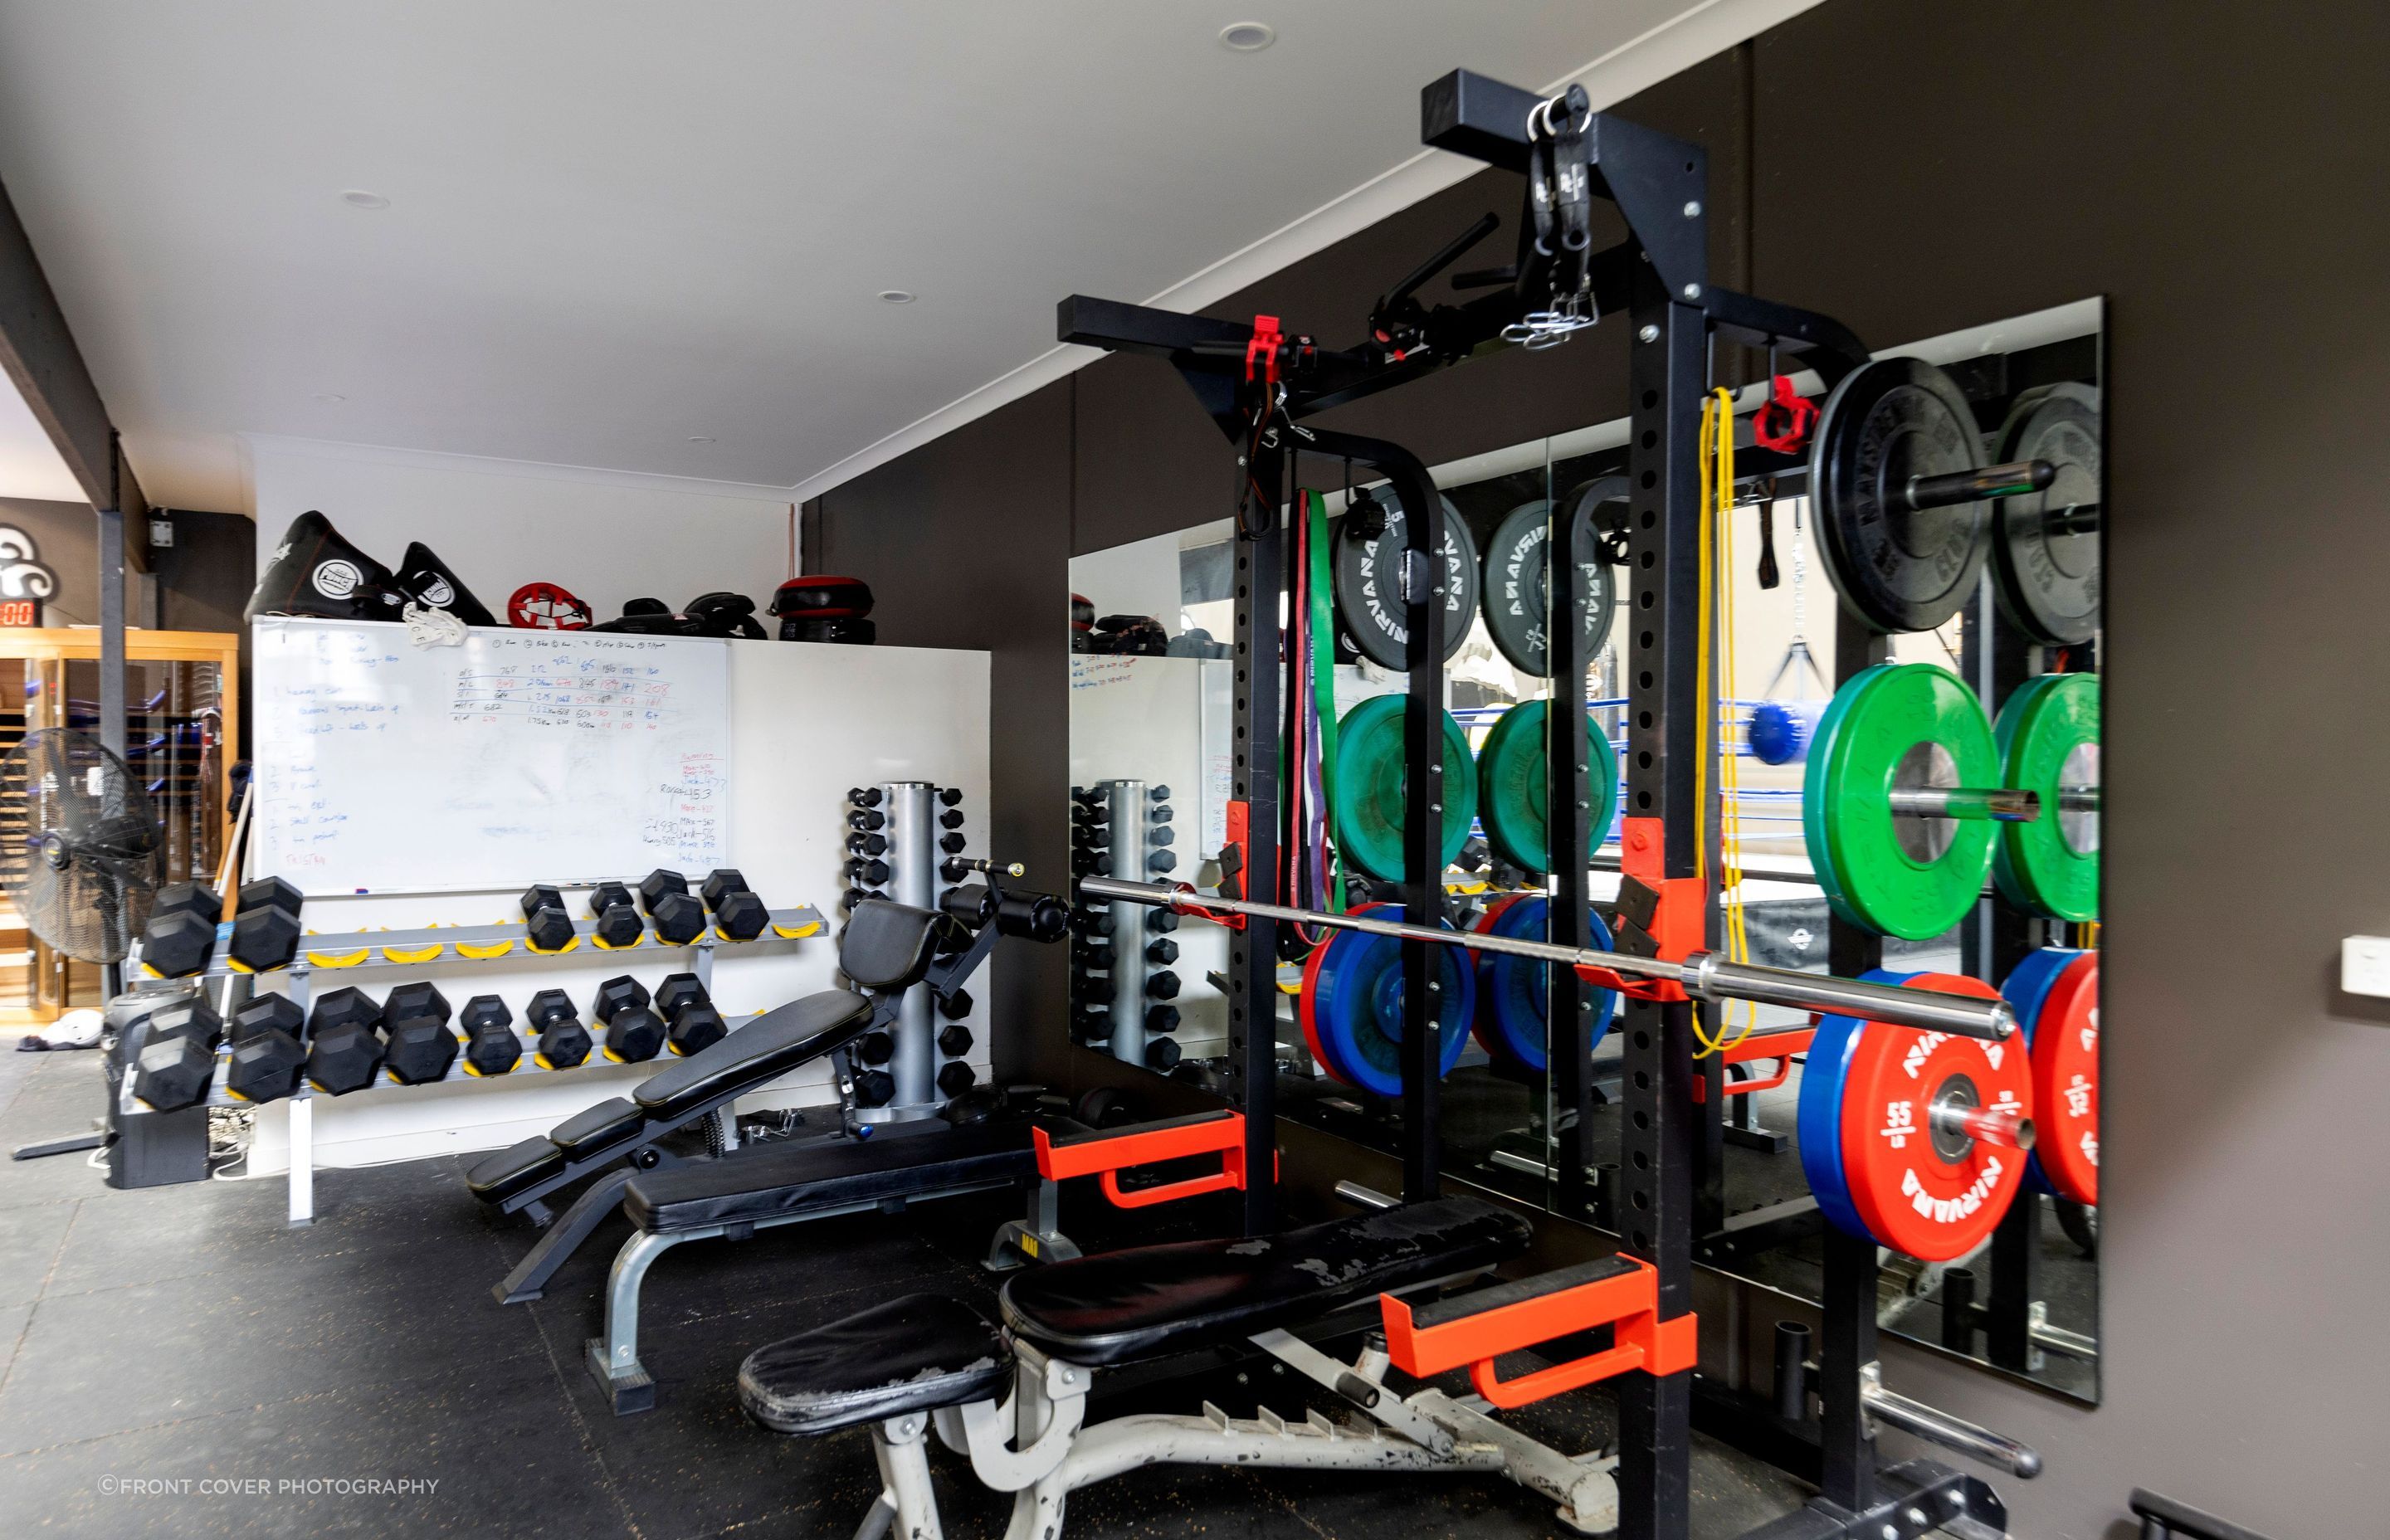 The perfect weights station in this Private Boxing Club